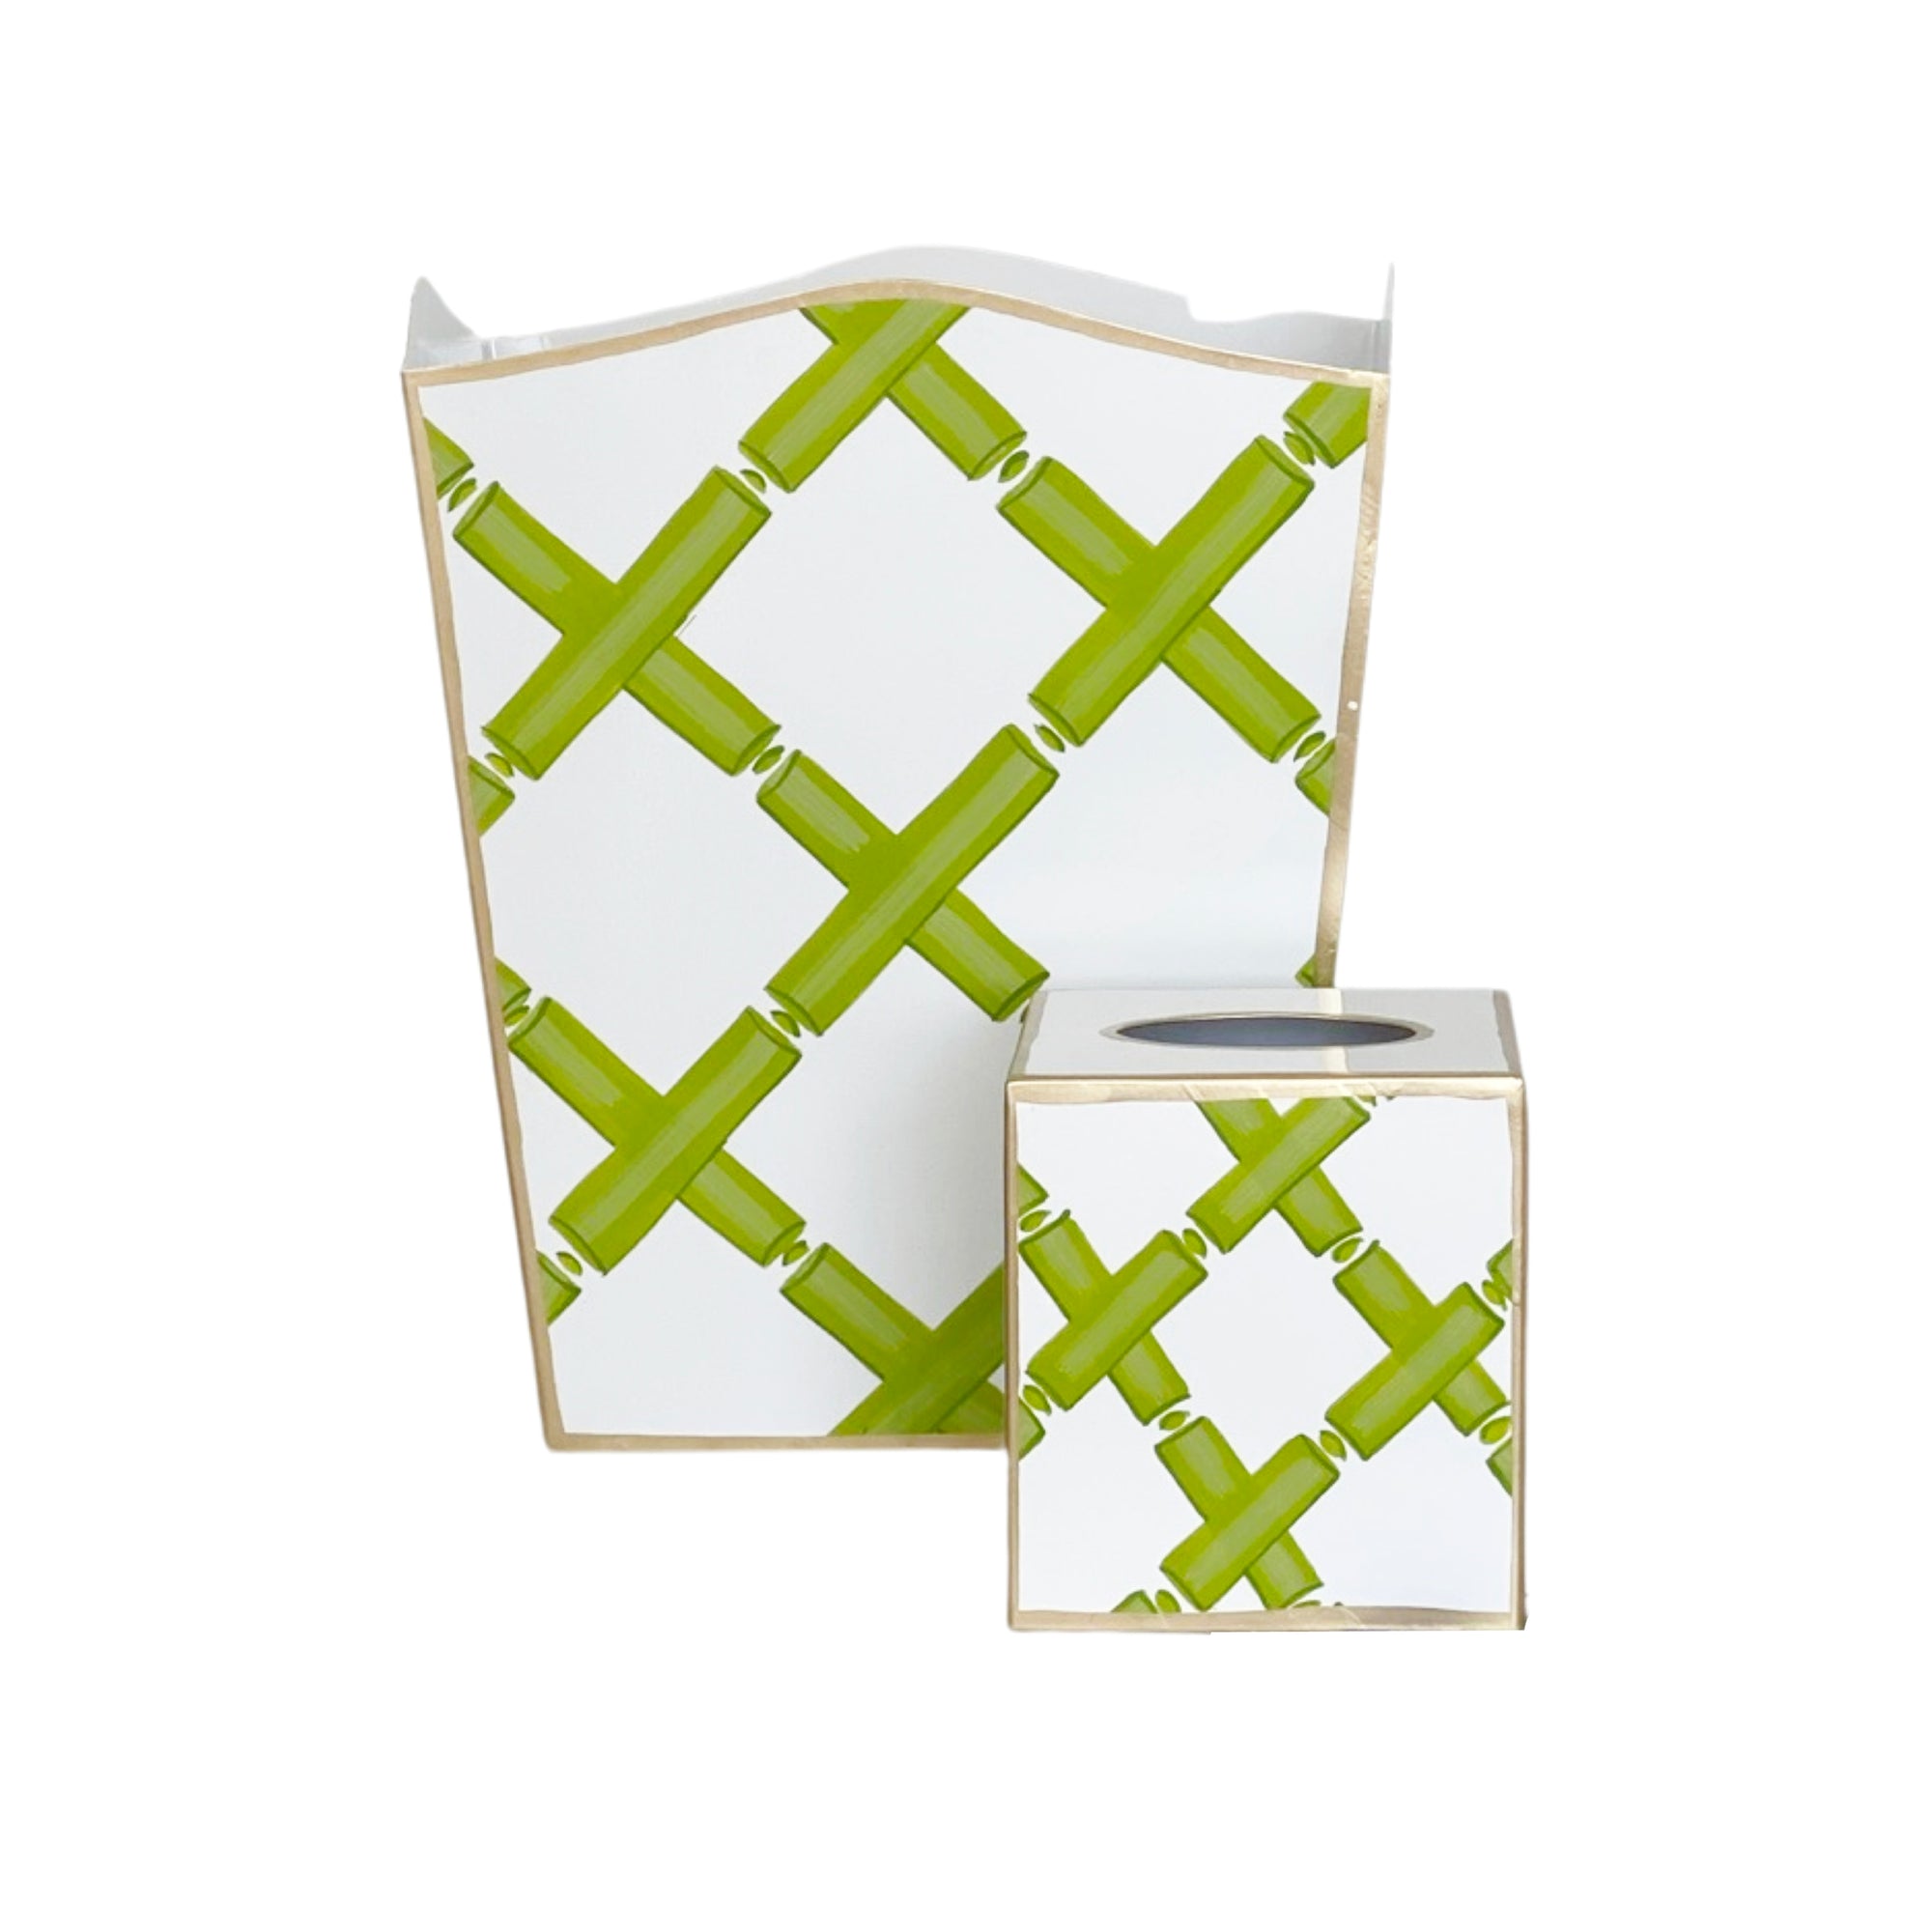 Bamboo Lattice in Green Wastebasket and Tissue Box